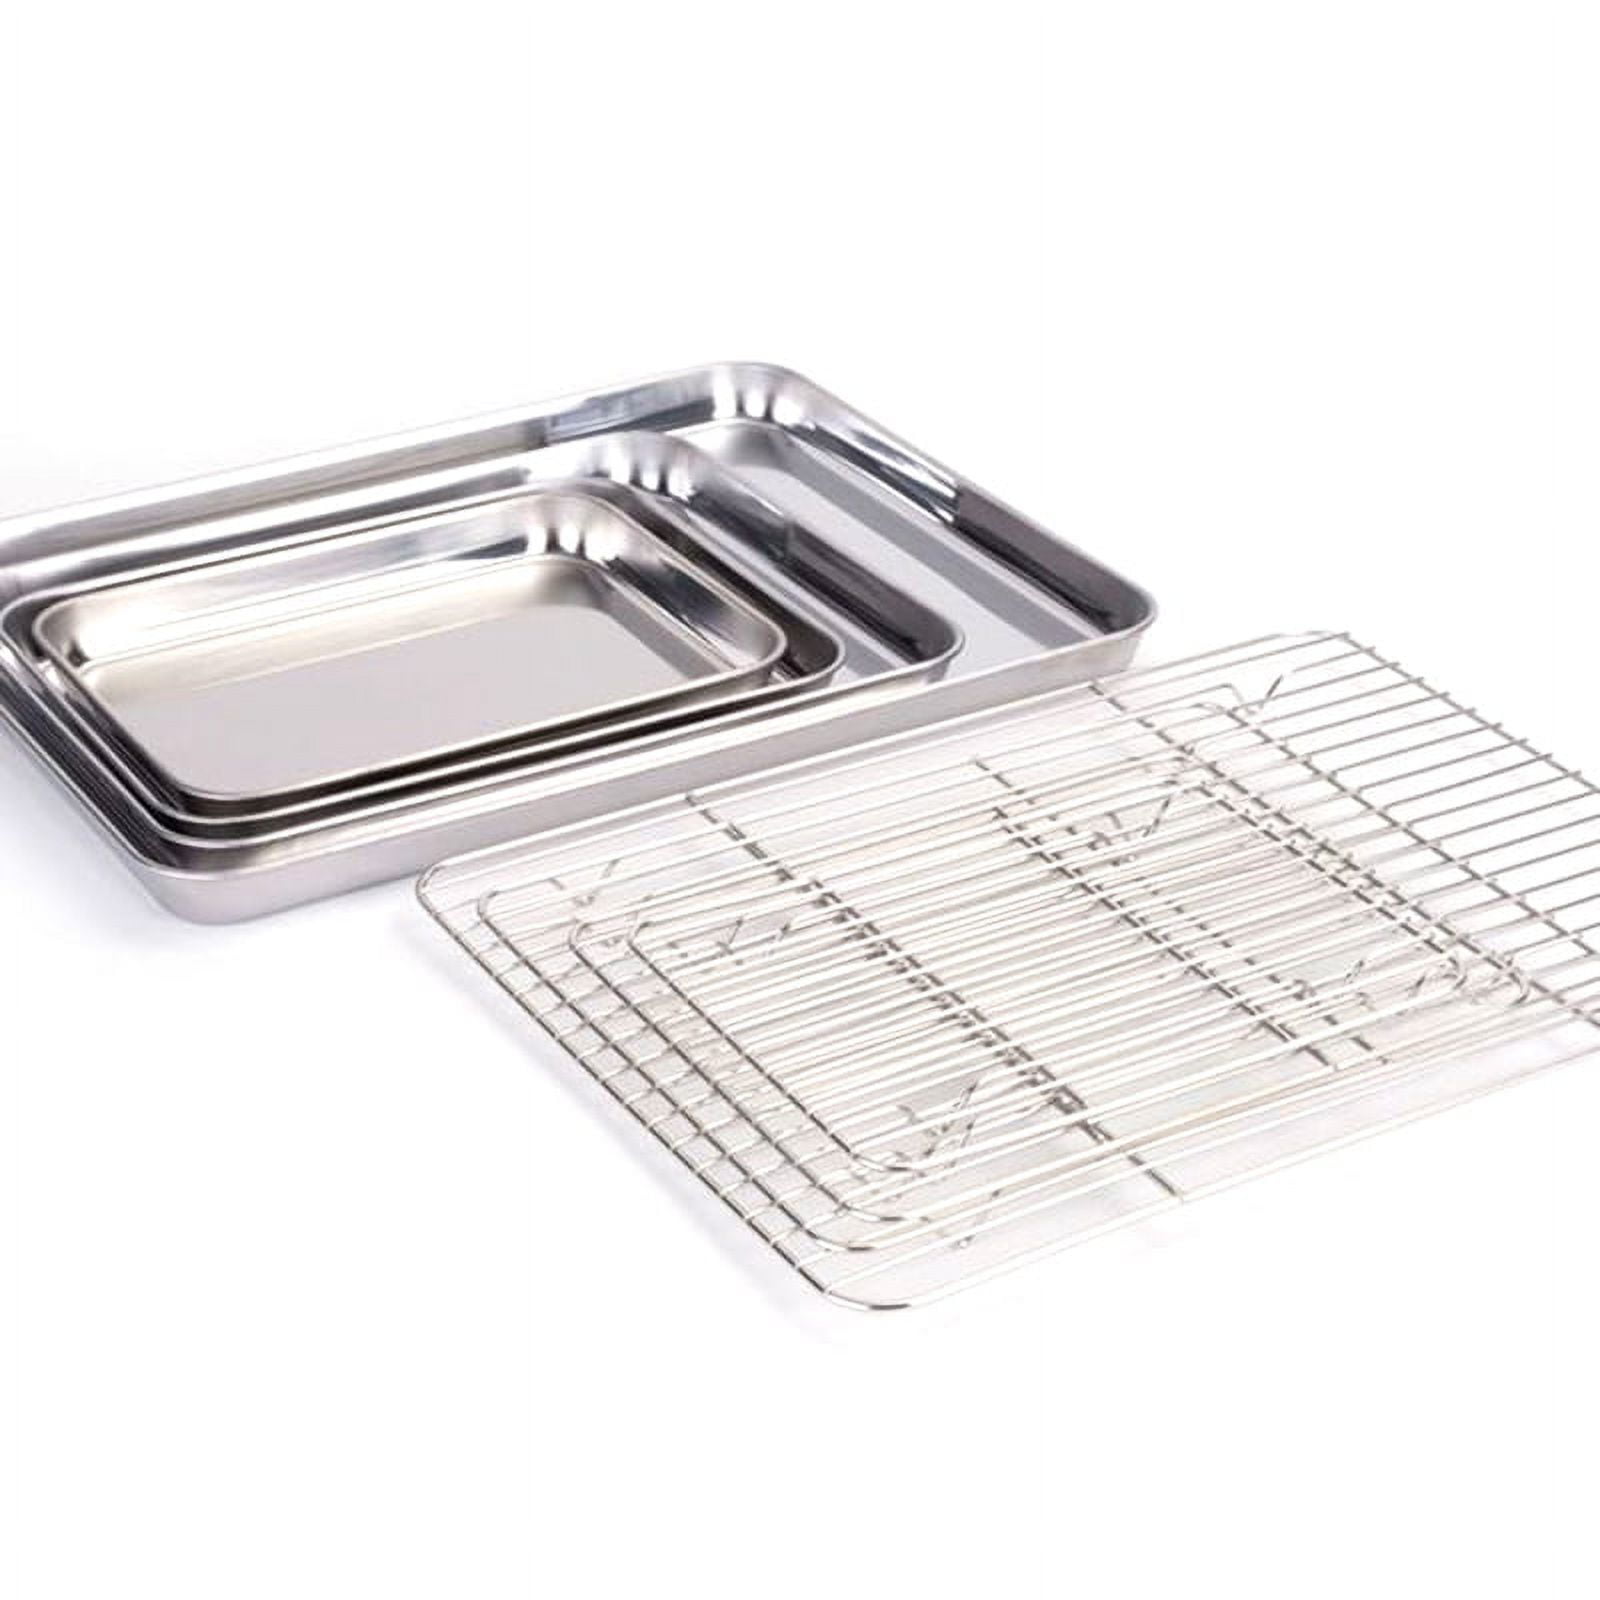 NOGIS Baking Sheet with Wire Rack Set, Stainless Steel Oven Tray& Cookie  Sheet with Cooling Rack for Baking,Rectangle Size 9 x7 x 1,Heavy Duty,  Non-Toxic, Easy Clean(Tray + Rack) 